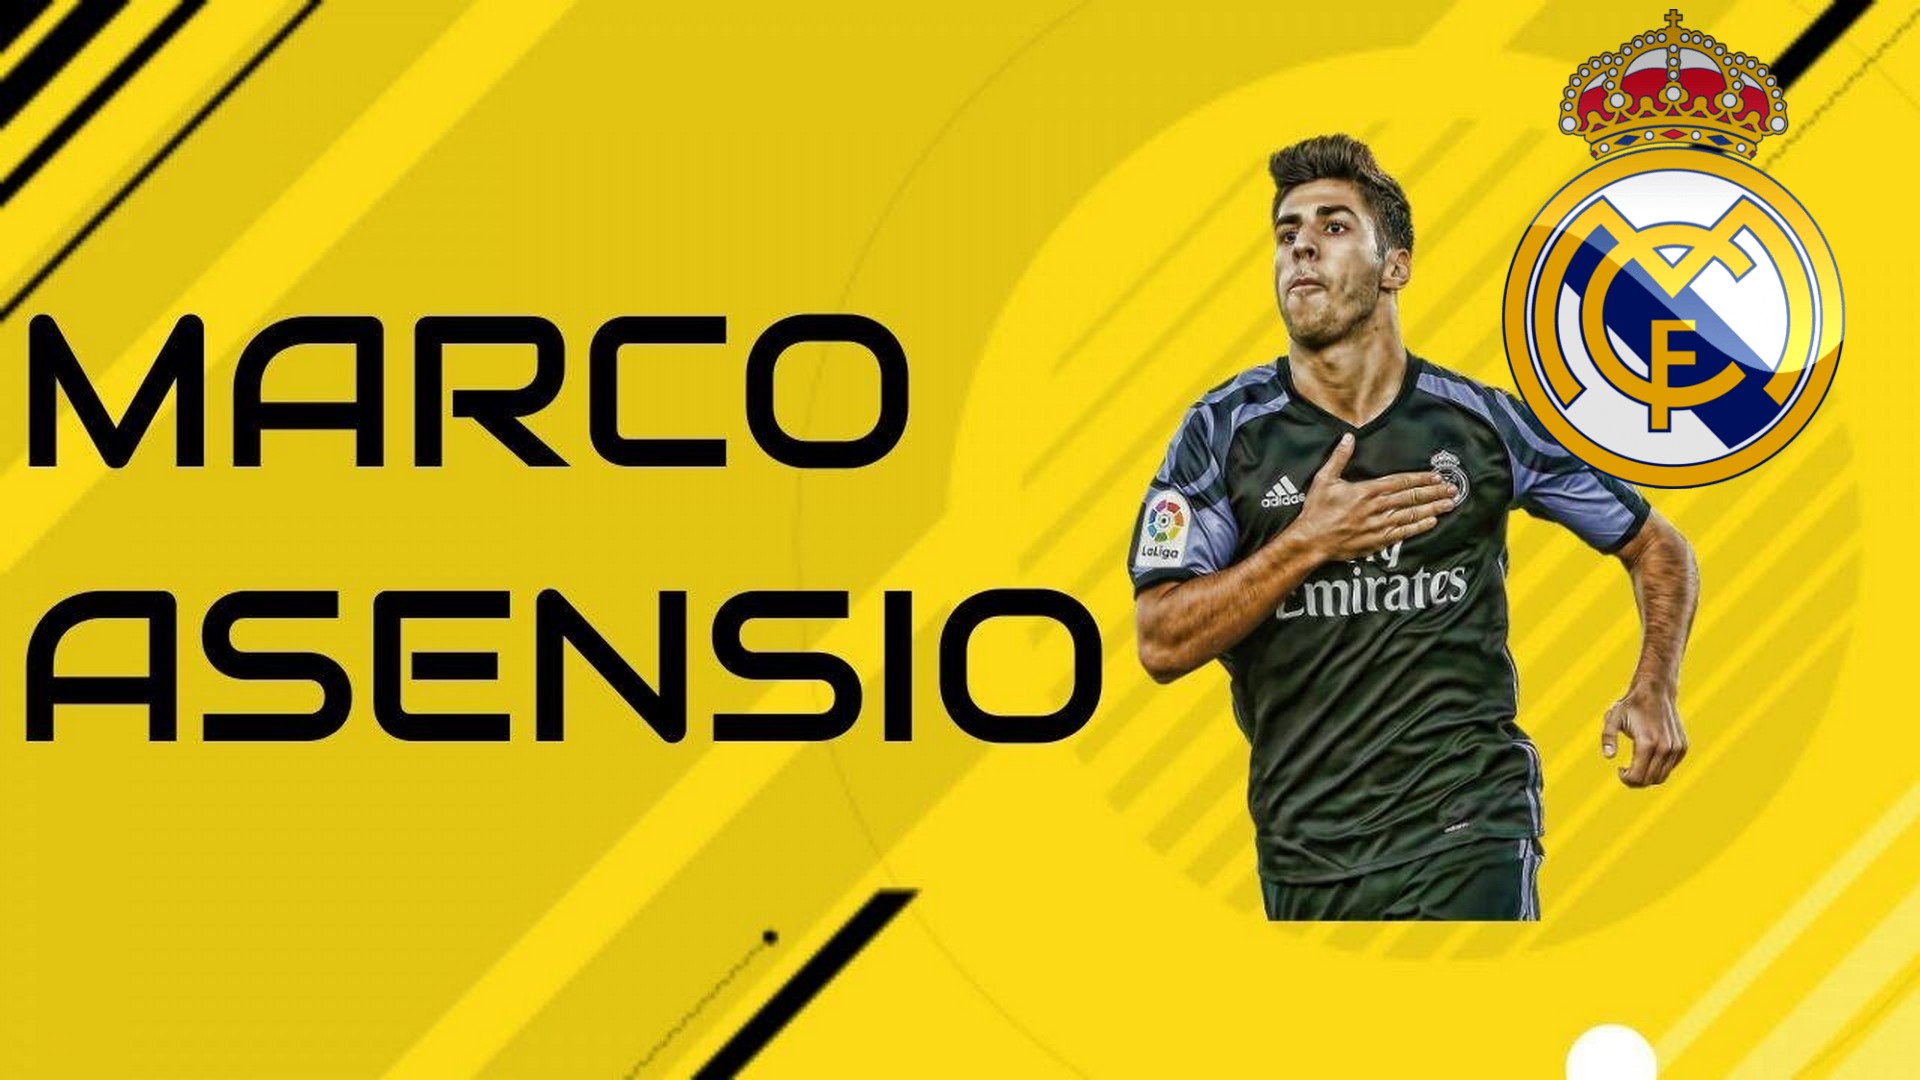 Wallpapers HD Marco Asensio Real Madrid With Resolution 1920X1080 pixel. You can make this wallpaper for your Mac or Windows Desktop Background, iPhone, Android or Tablet and another Smartphone device for free